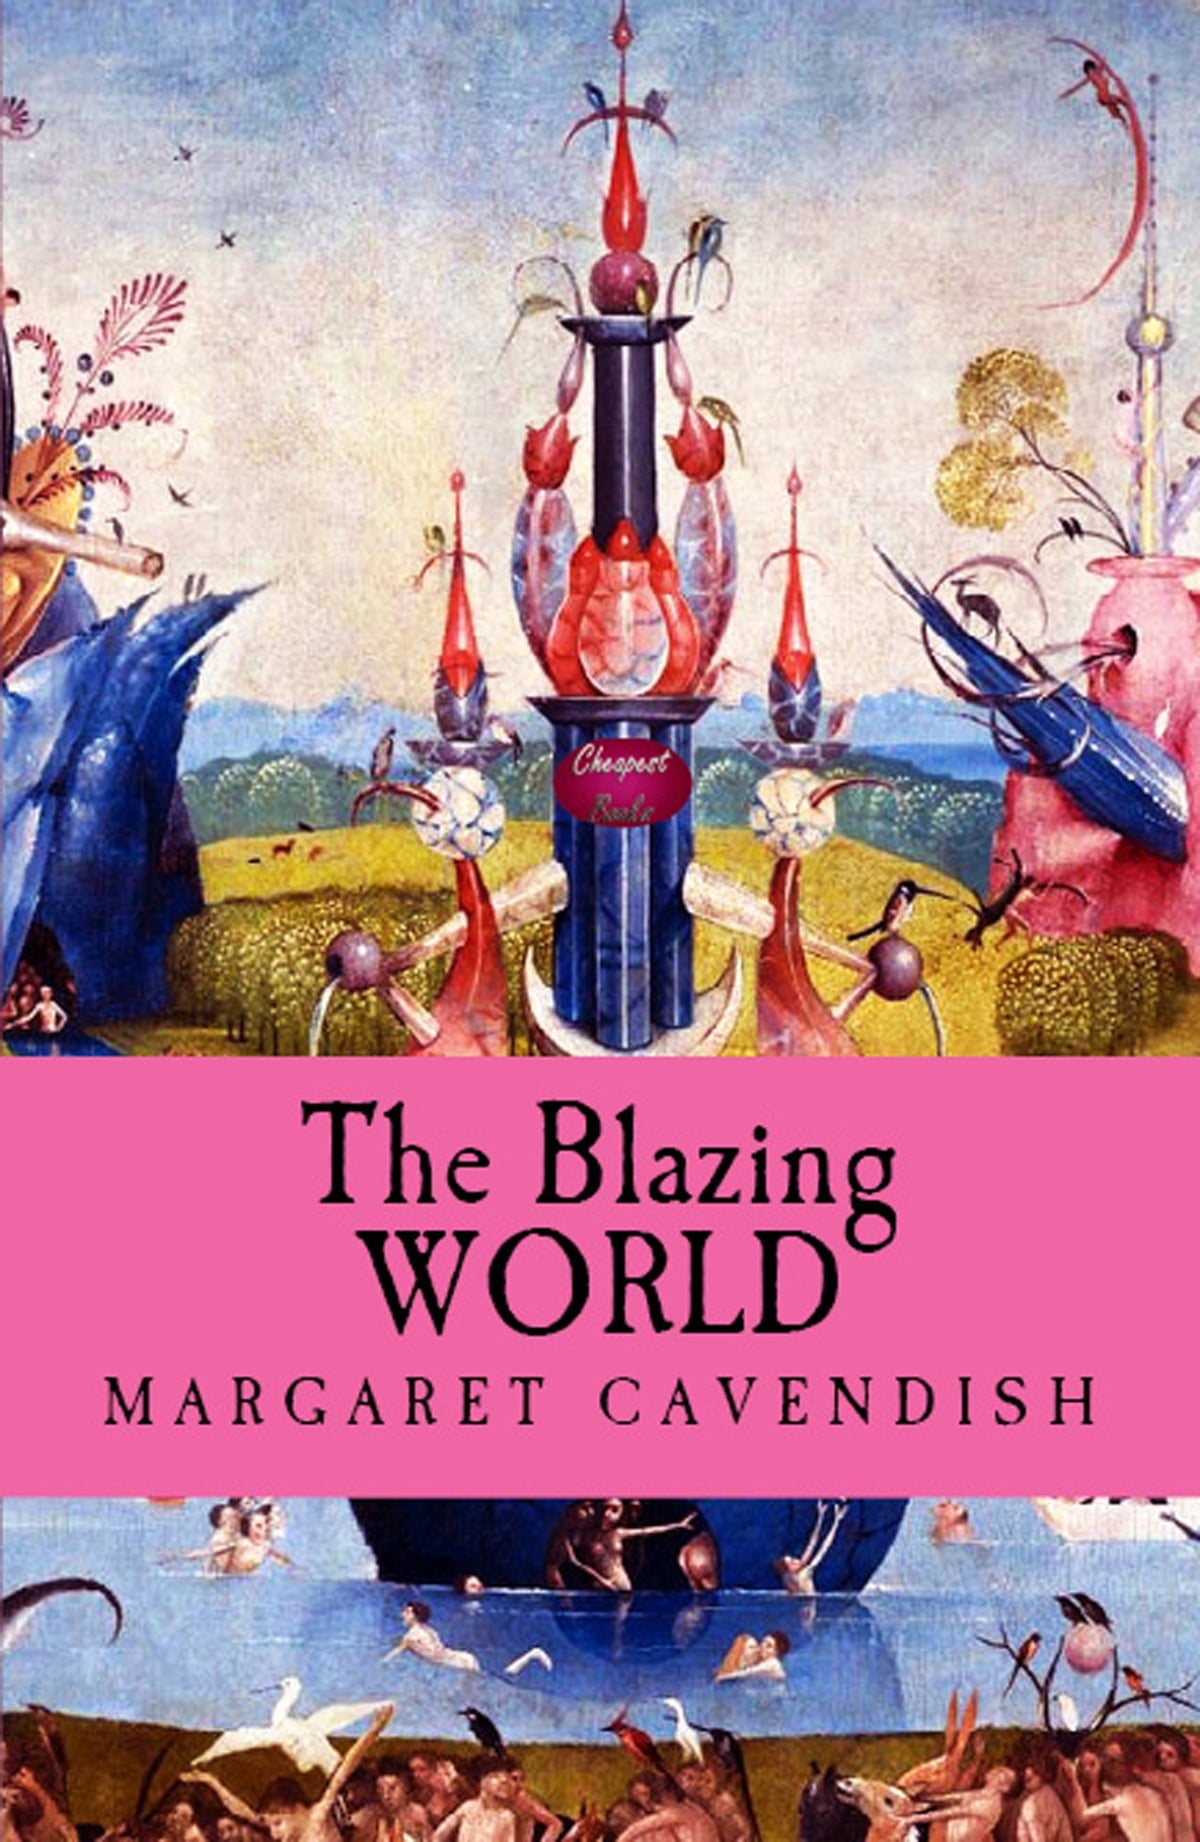 Cover of Cheapest Books' publication of The Blazing World. (Image: Cheapest Books)